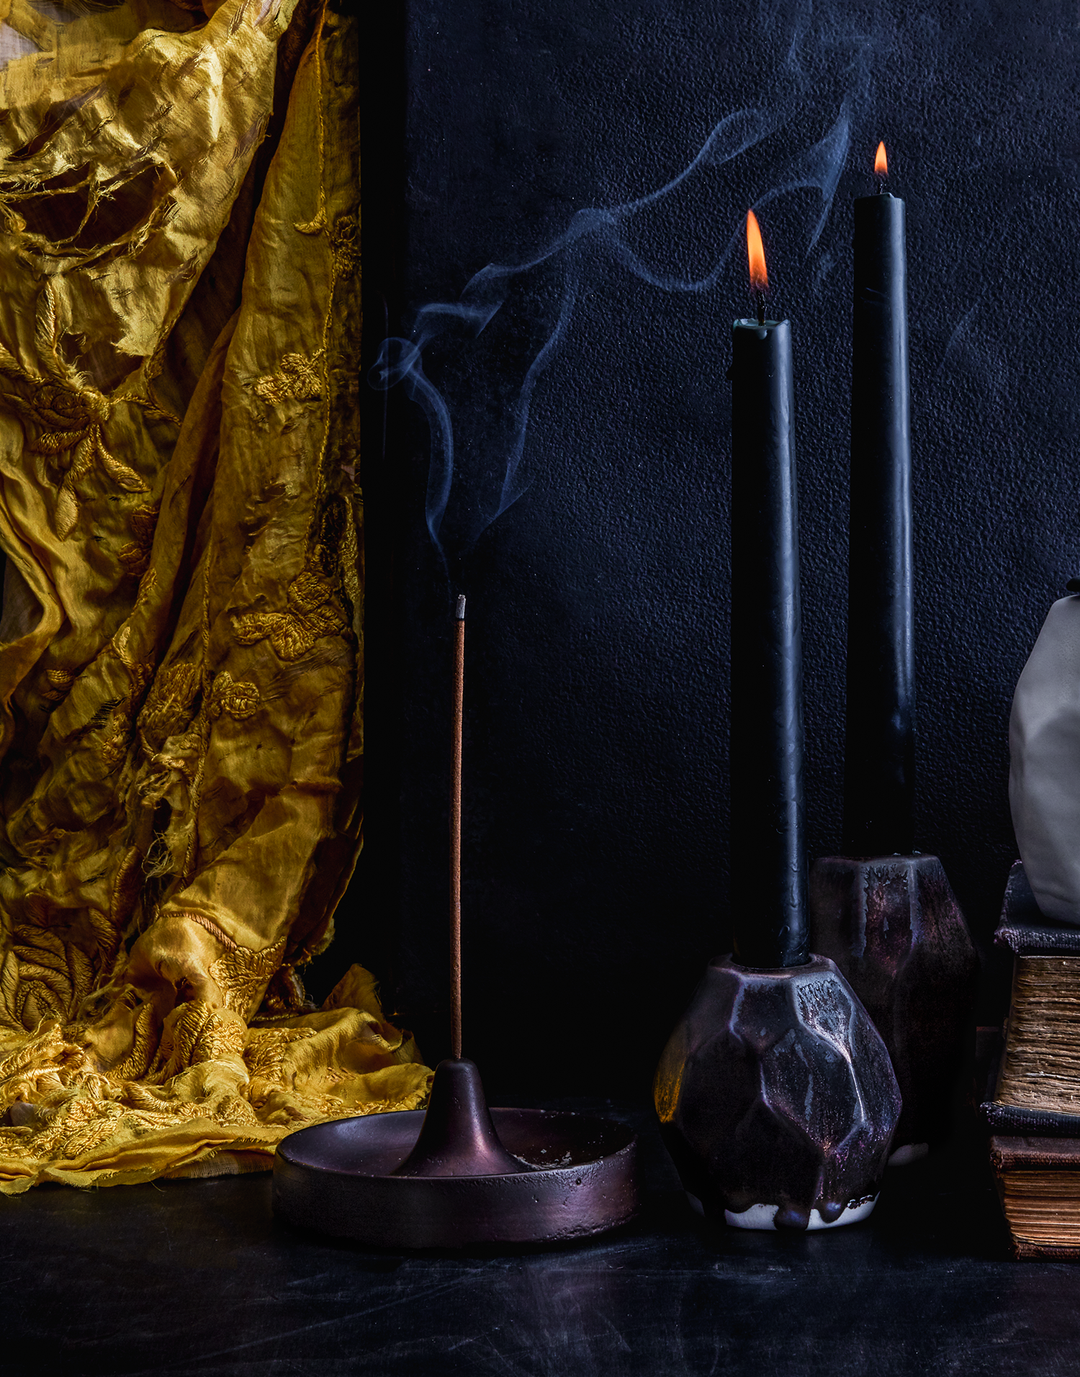 Hand-cast bronze incense burner with smokey incense, black candles, and gold fabric in a dark photography scene